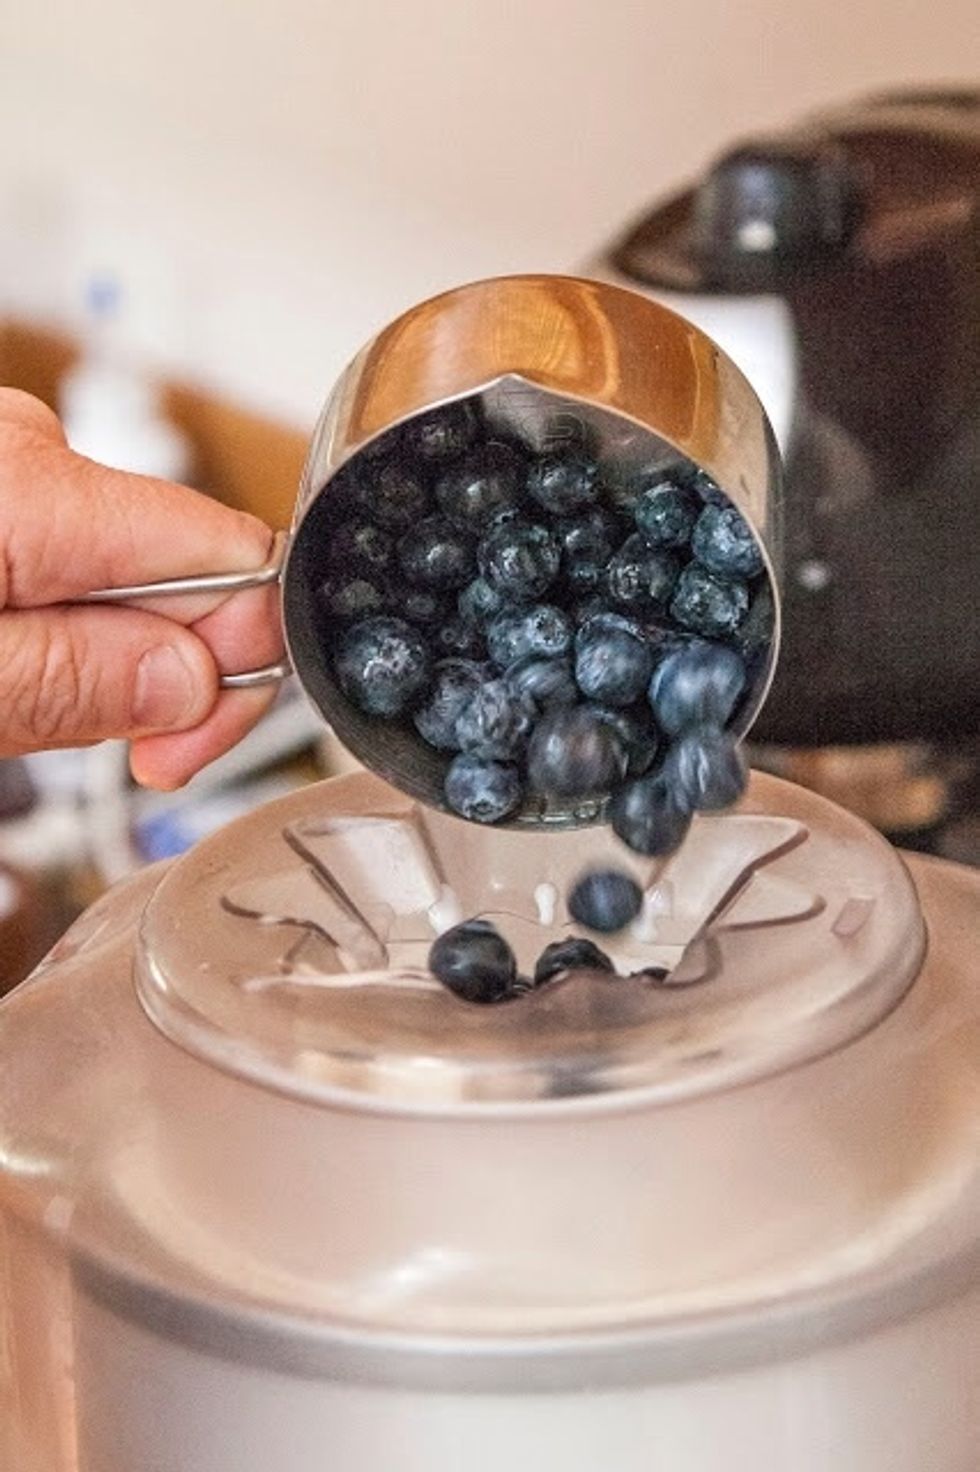 Process the ice cream for about 25 minutes or so, then add in the blueberries. Add them slowly and push them down into the mixture as so that they're evenly distributed through the ice cream mixture.